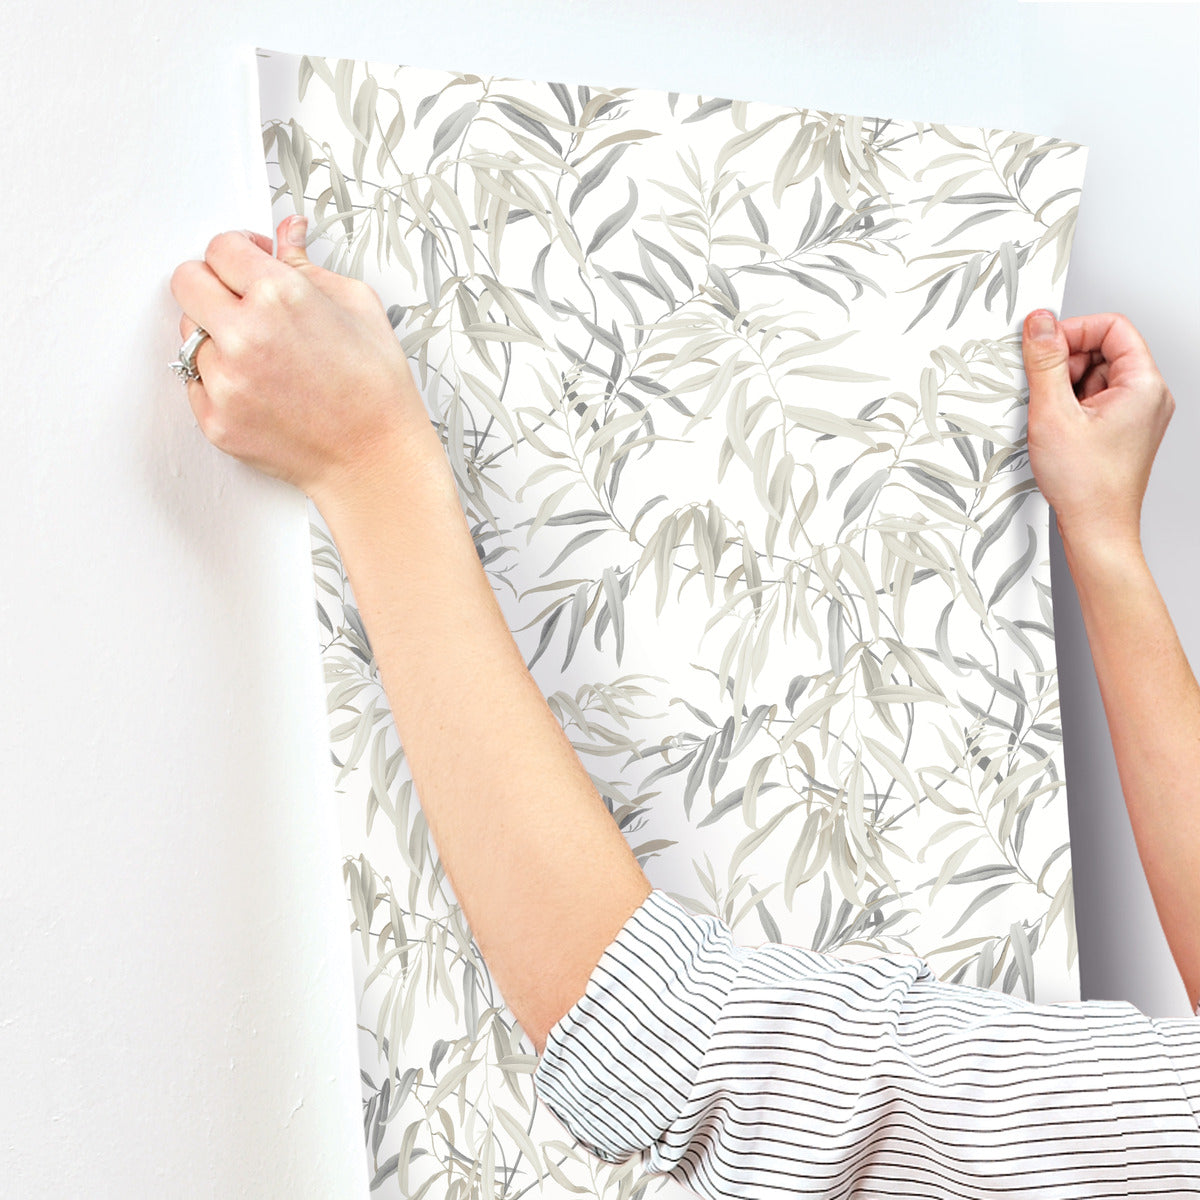 A person wearing a striped shirt and a ring is seen from the shoulders down, applying a sheet of York Wallcoverings Willow Grove Clay Wallpaper Pink (60 Sq.Ft.) to a white wall. The wallpaper features a subtle pattern of green and gray leafy vines, creating a delicate, botanical retreat inspired design.